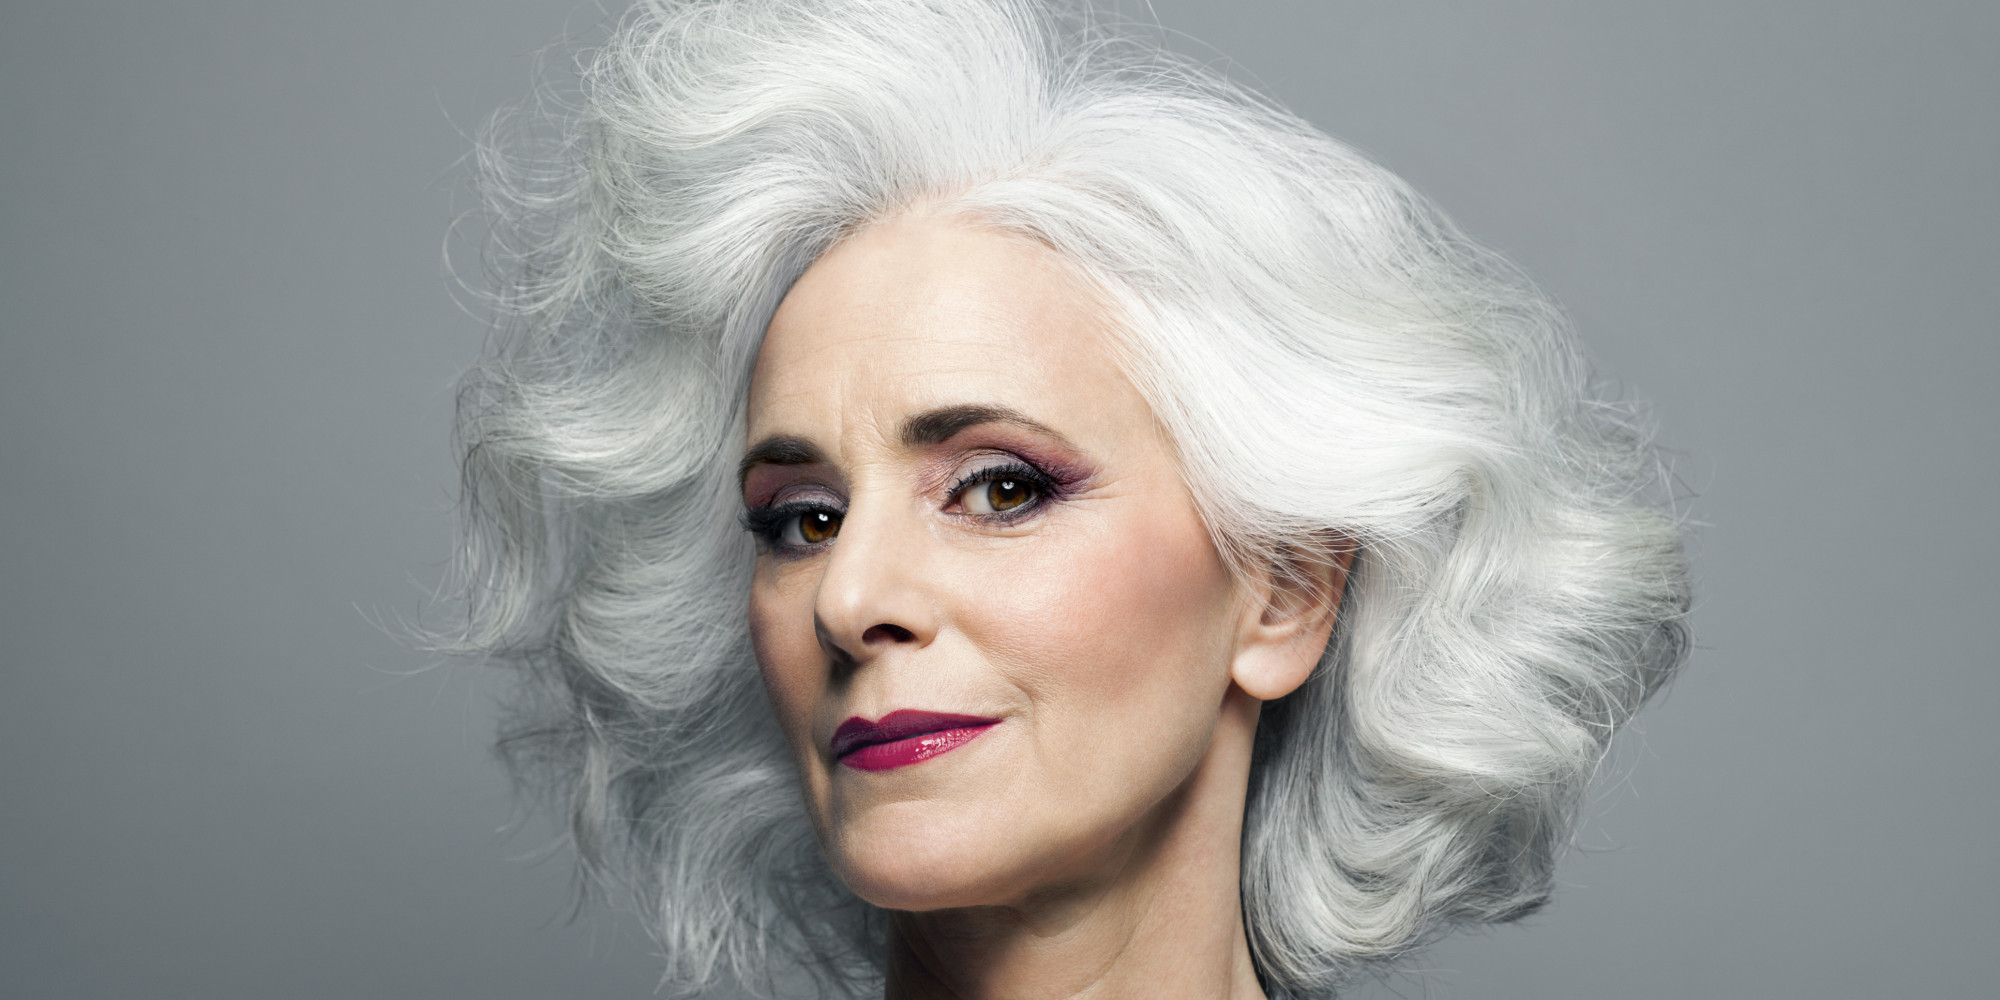 10 Makeup Mistakes That Are Aging You | HuffPost